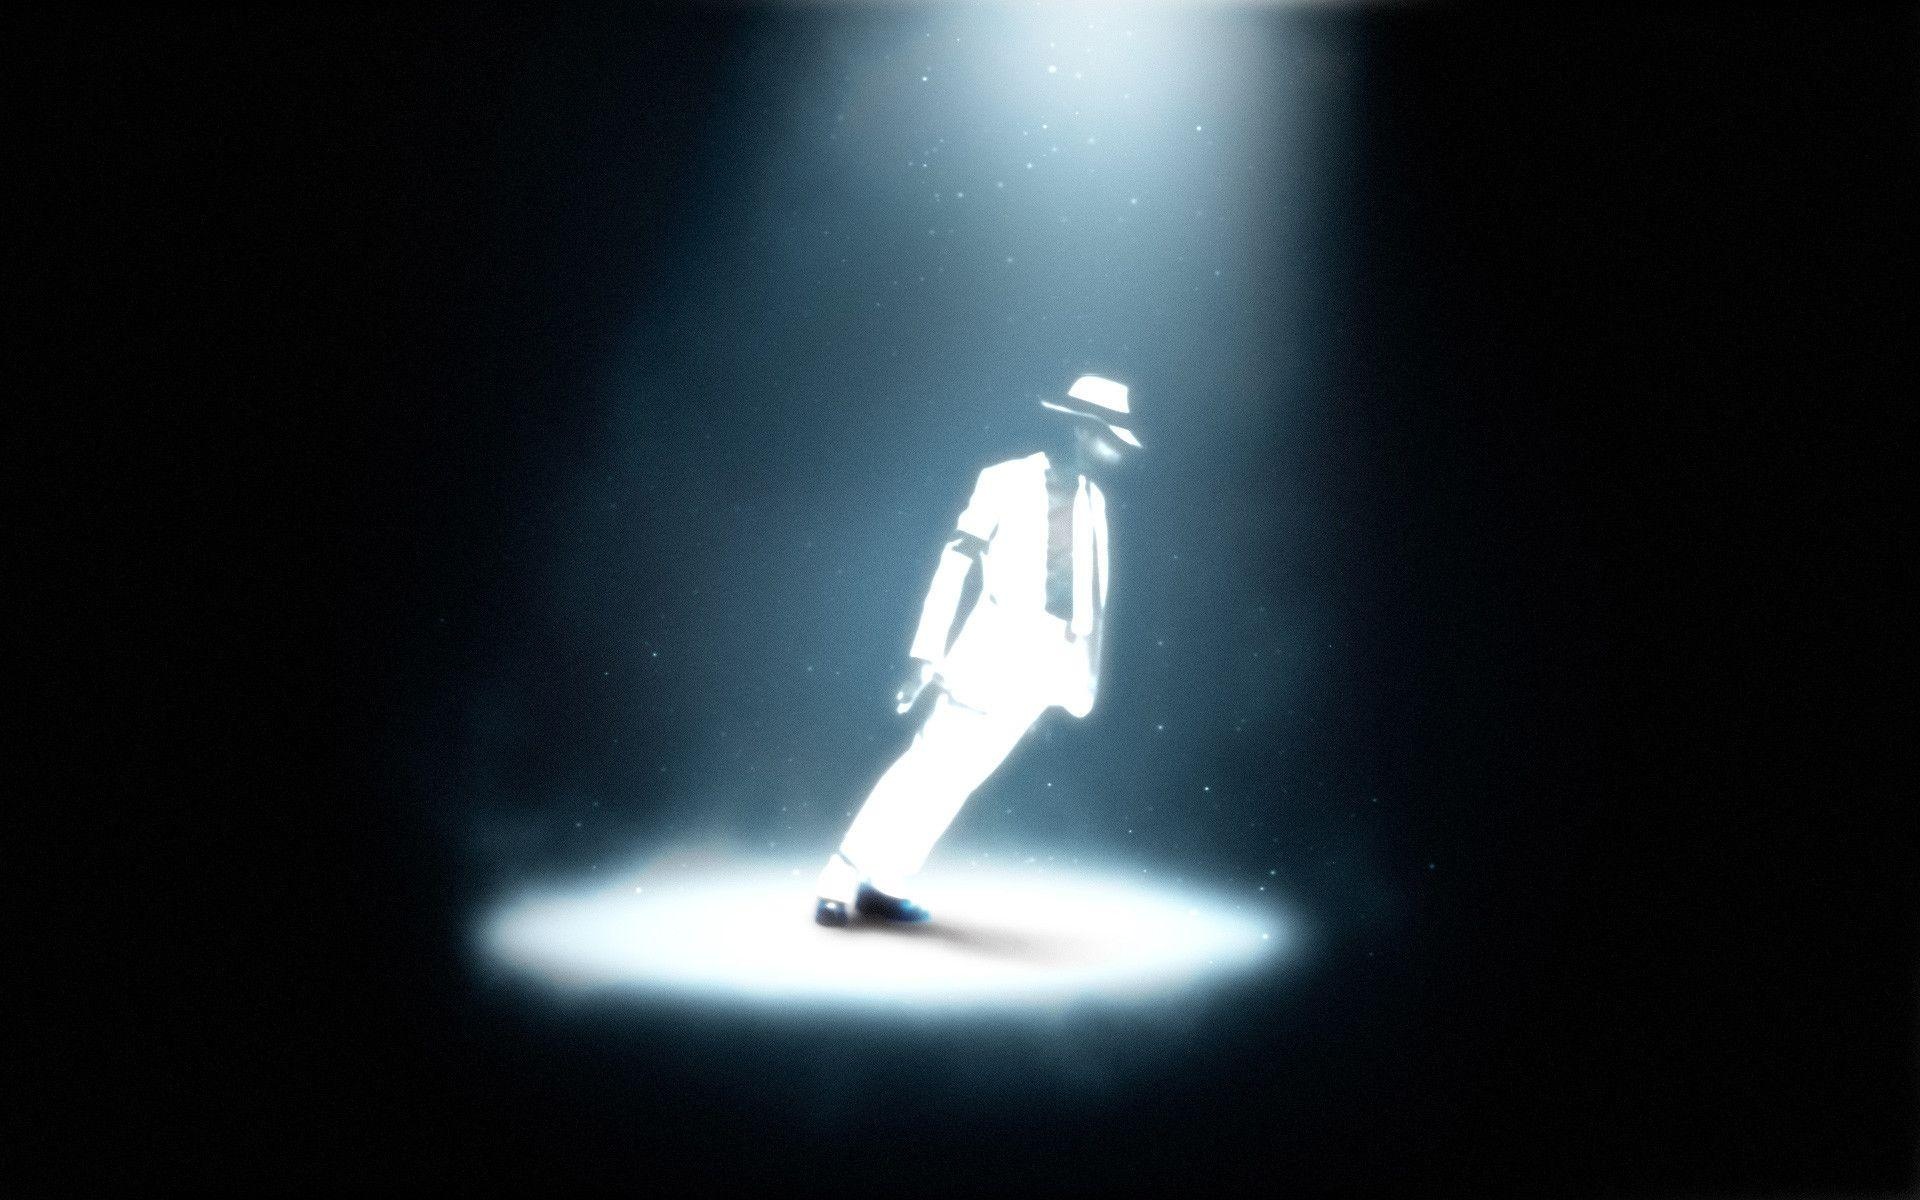 Moonwalk Dance: Jackson, One of the most significant cultural figures of the 20th century, Stage performance. 1920x1200 HD Wallpaper.